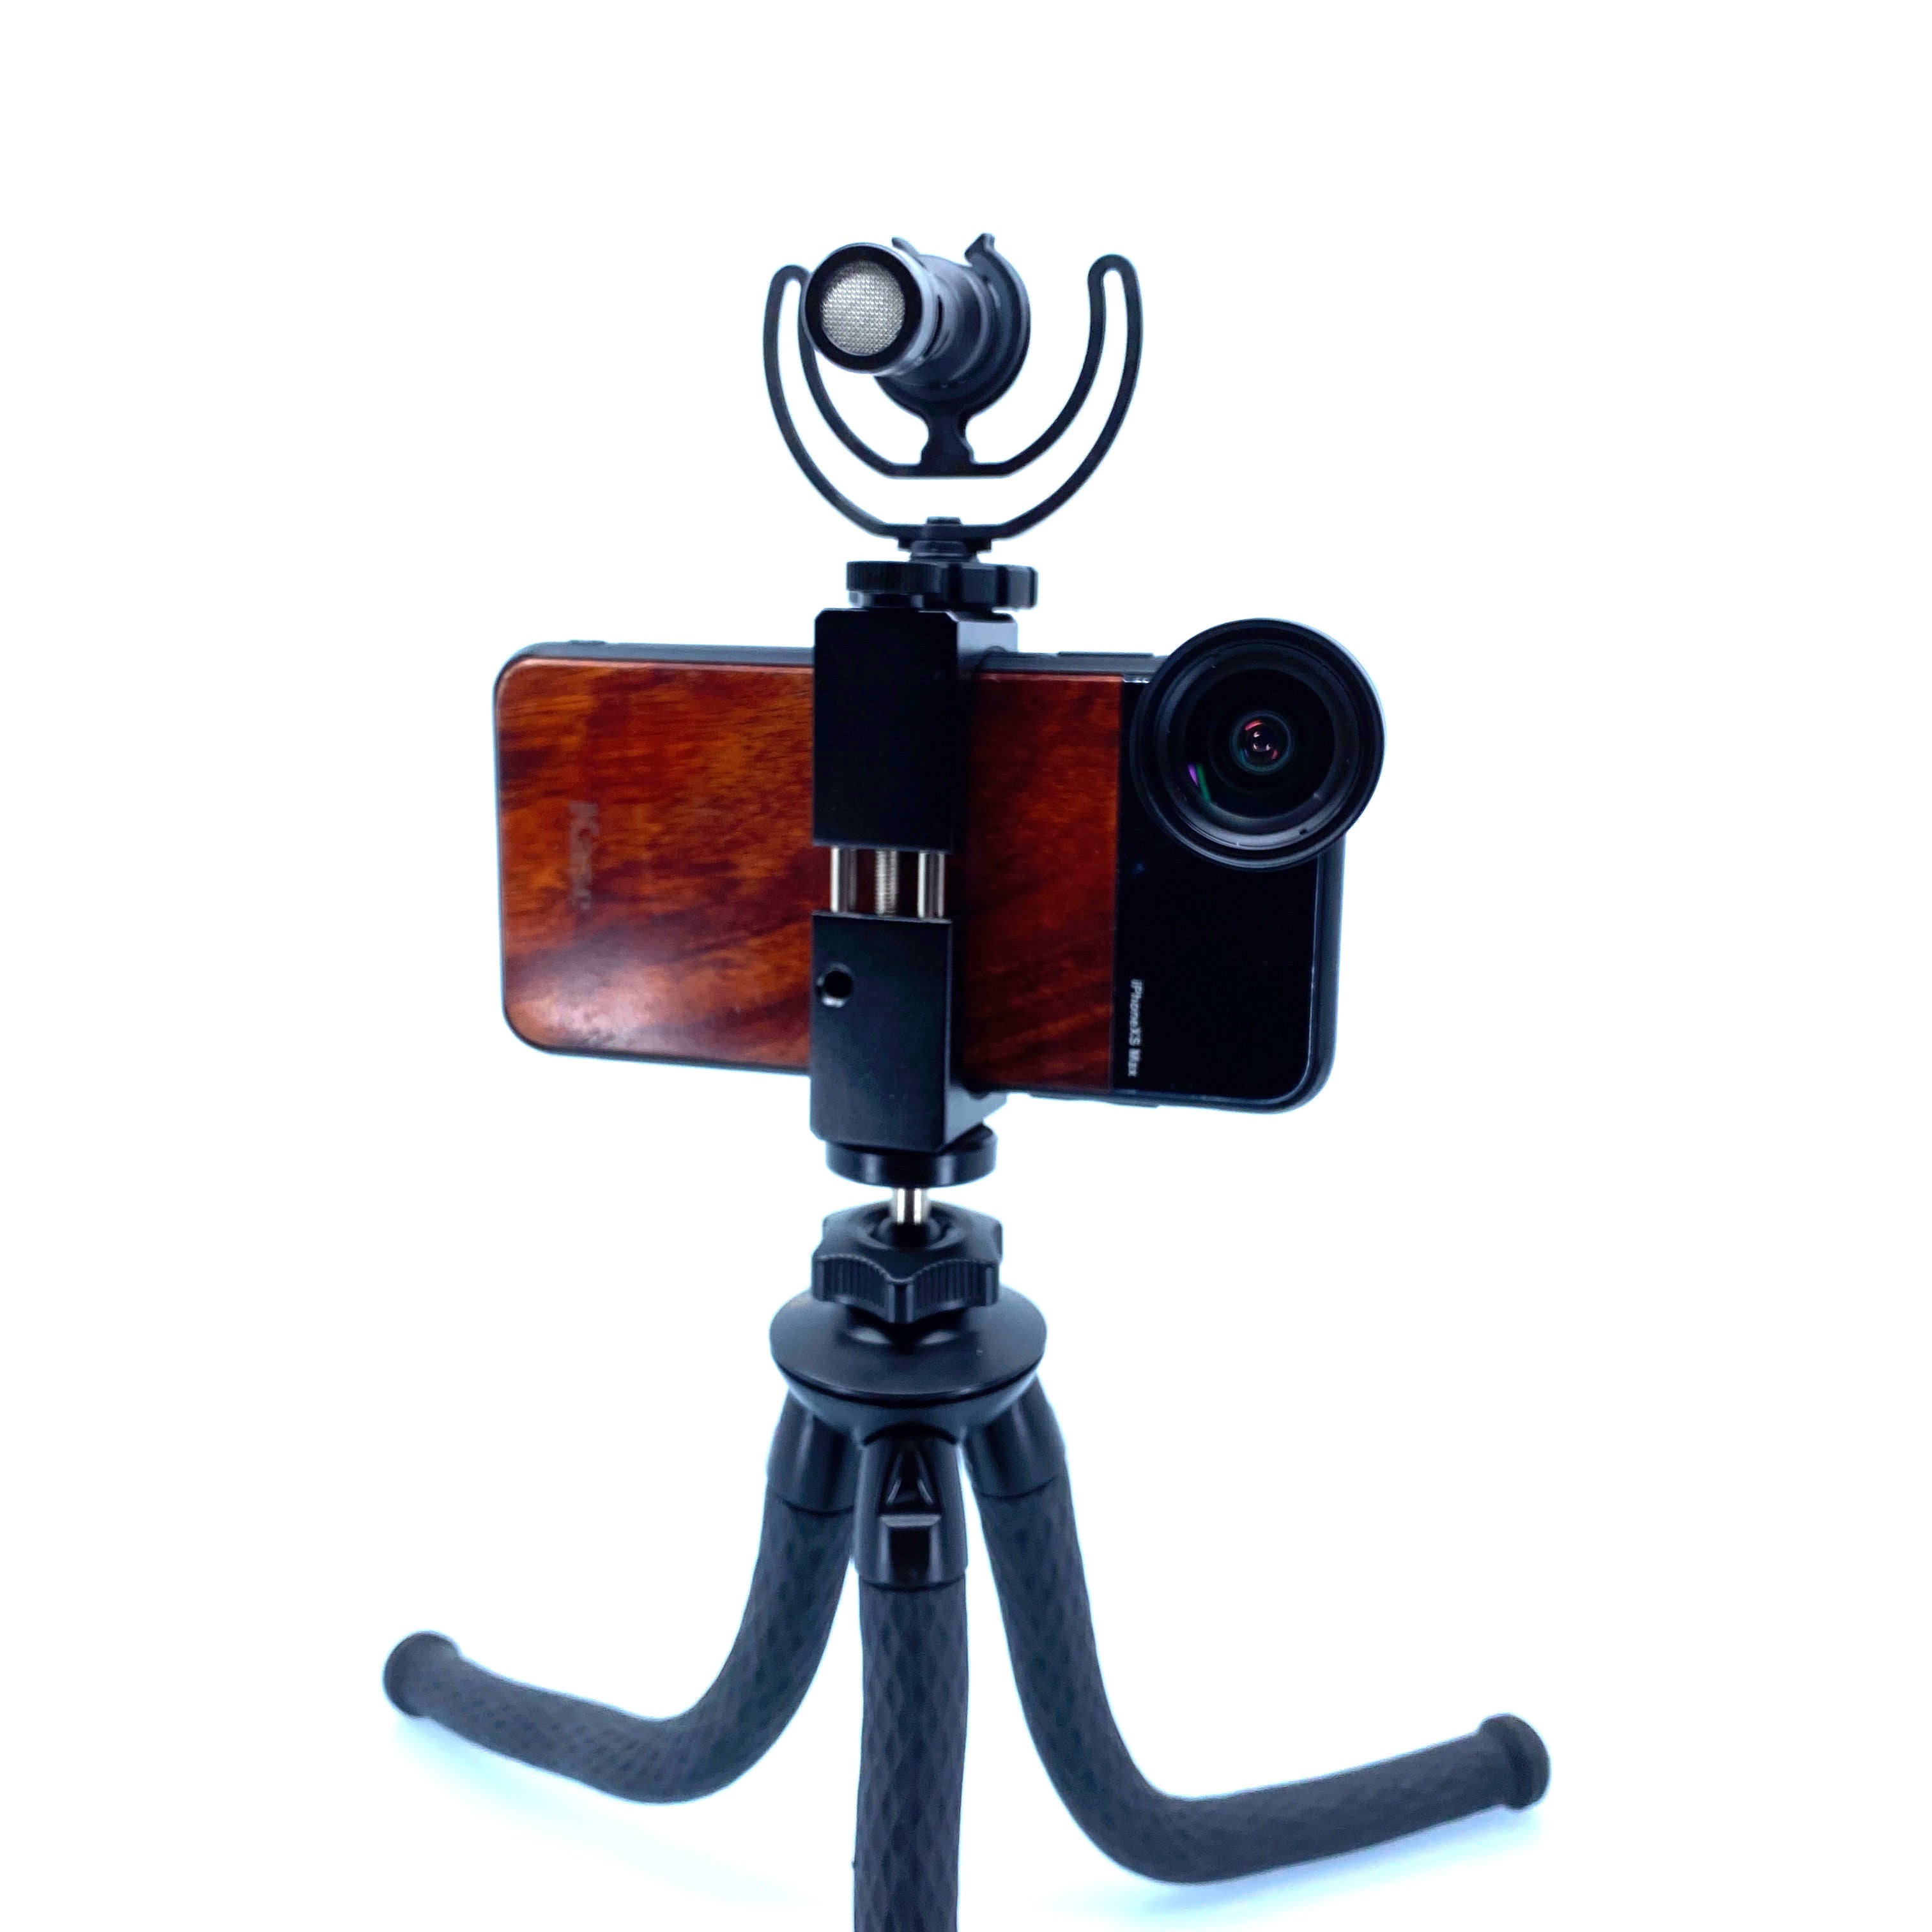 iOgrapher Phone Holder With Shoe